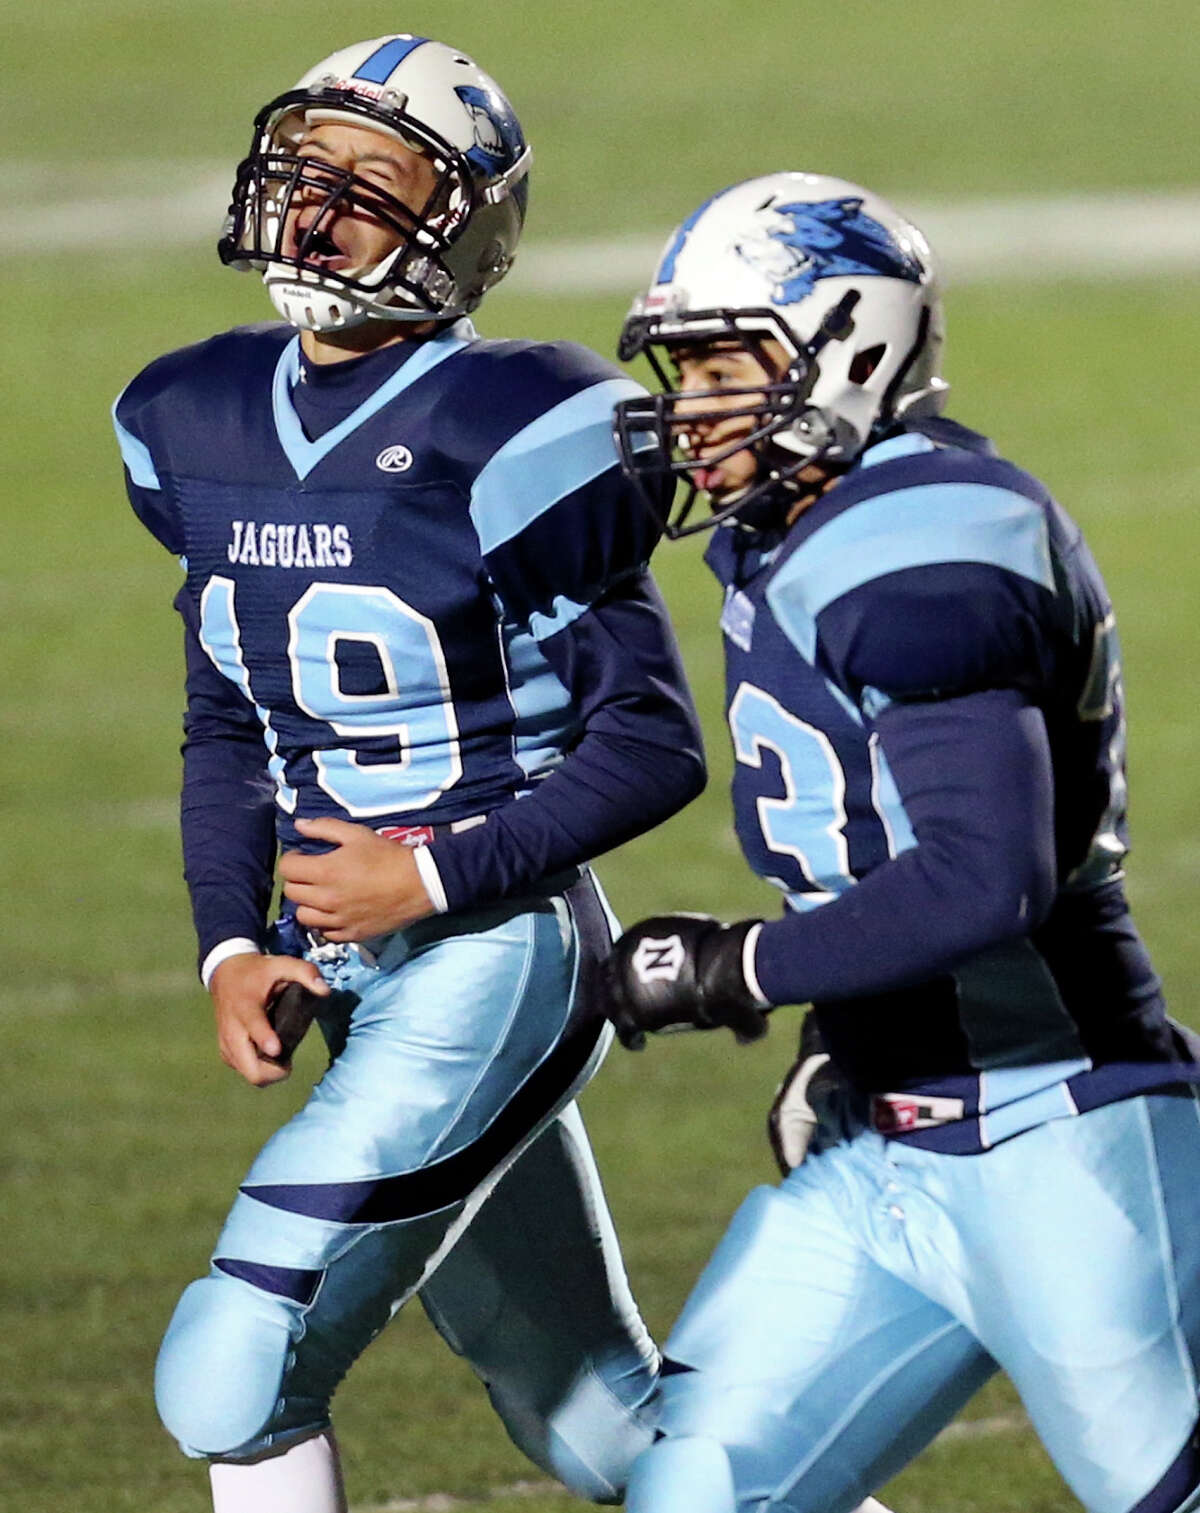 Johnson's Zachary Elder (left) celebrates as he walks off the field with teammate Nick Vidal after making a field goal late in second half action of their Class 5A Division II area playoff game against Brandeis Friday Nov. 22, 2013 at Heroes Stadium. Johnson won 23-17 in overtime.